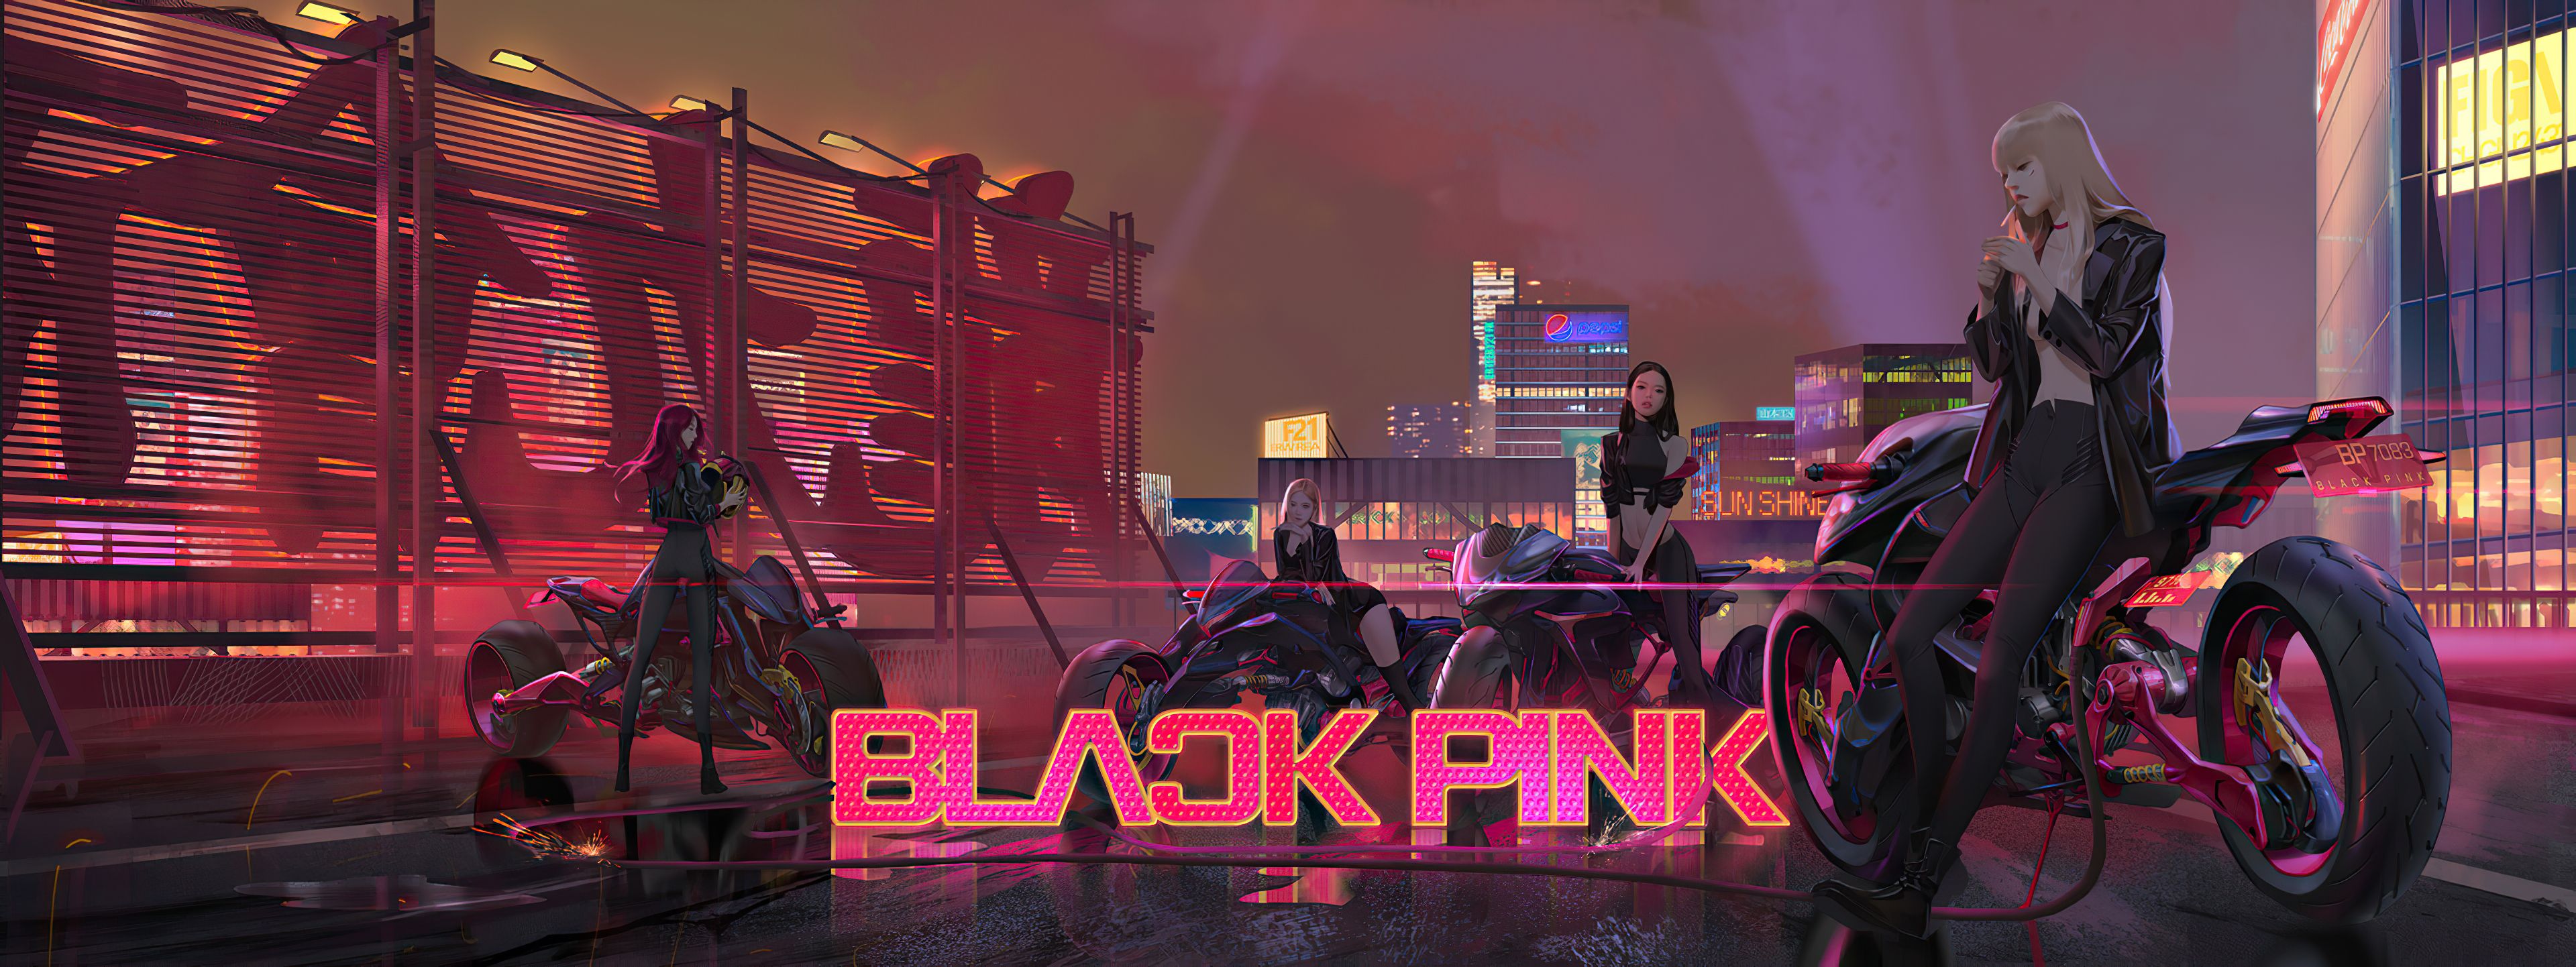 Blackpink 4k 1600x900 Resolution HD 4k Wallpaper, Image, Background, Photo and Picture